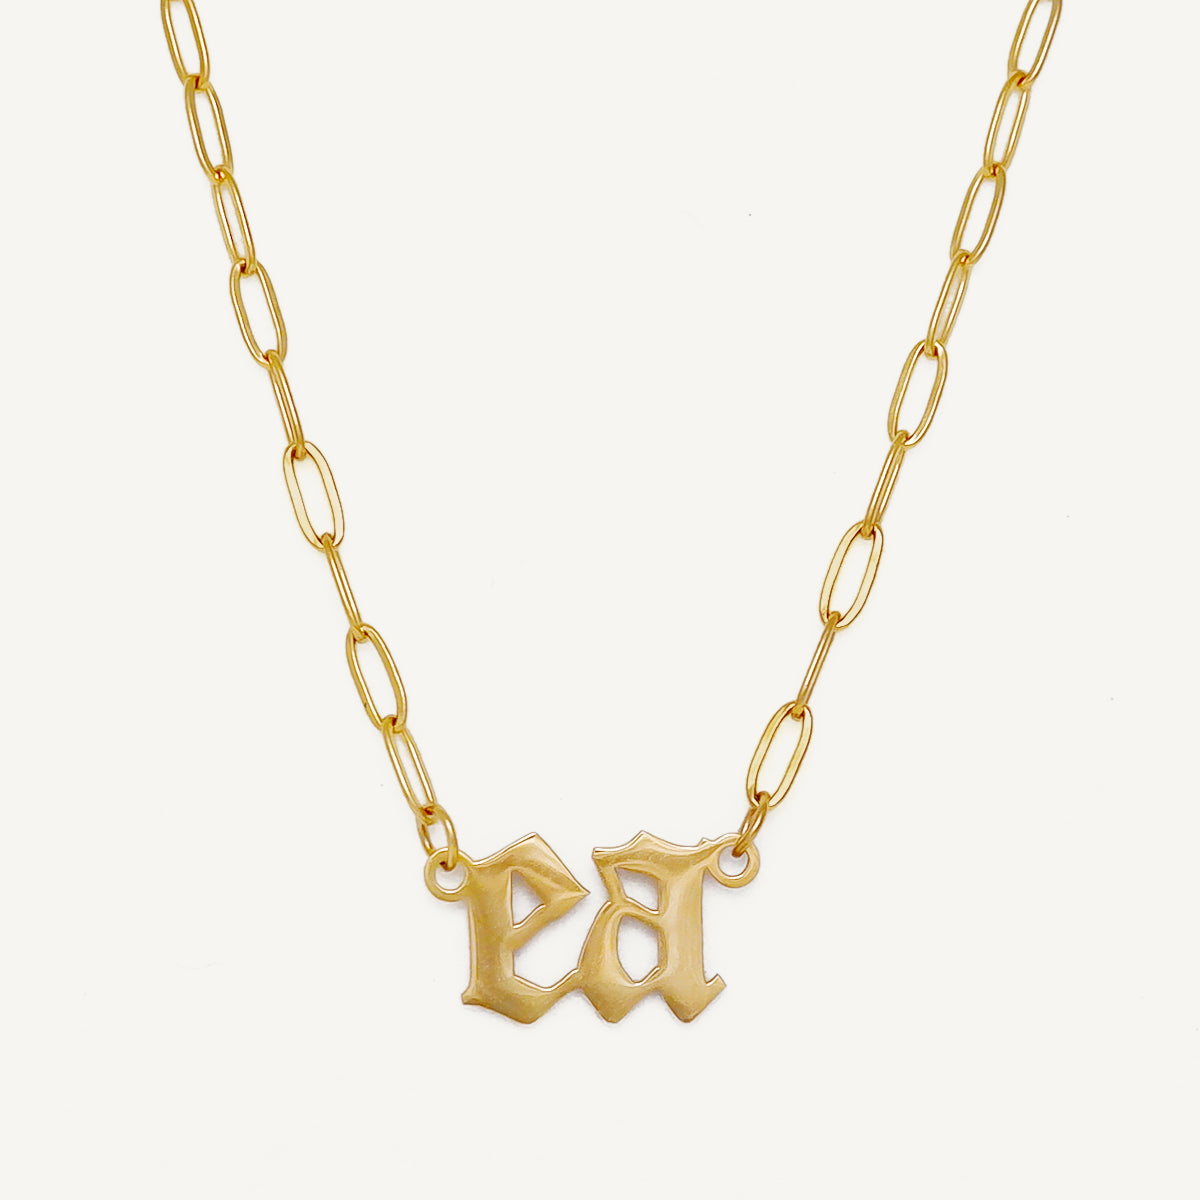 The Filly Gothic Initial / Name Necklace